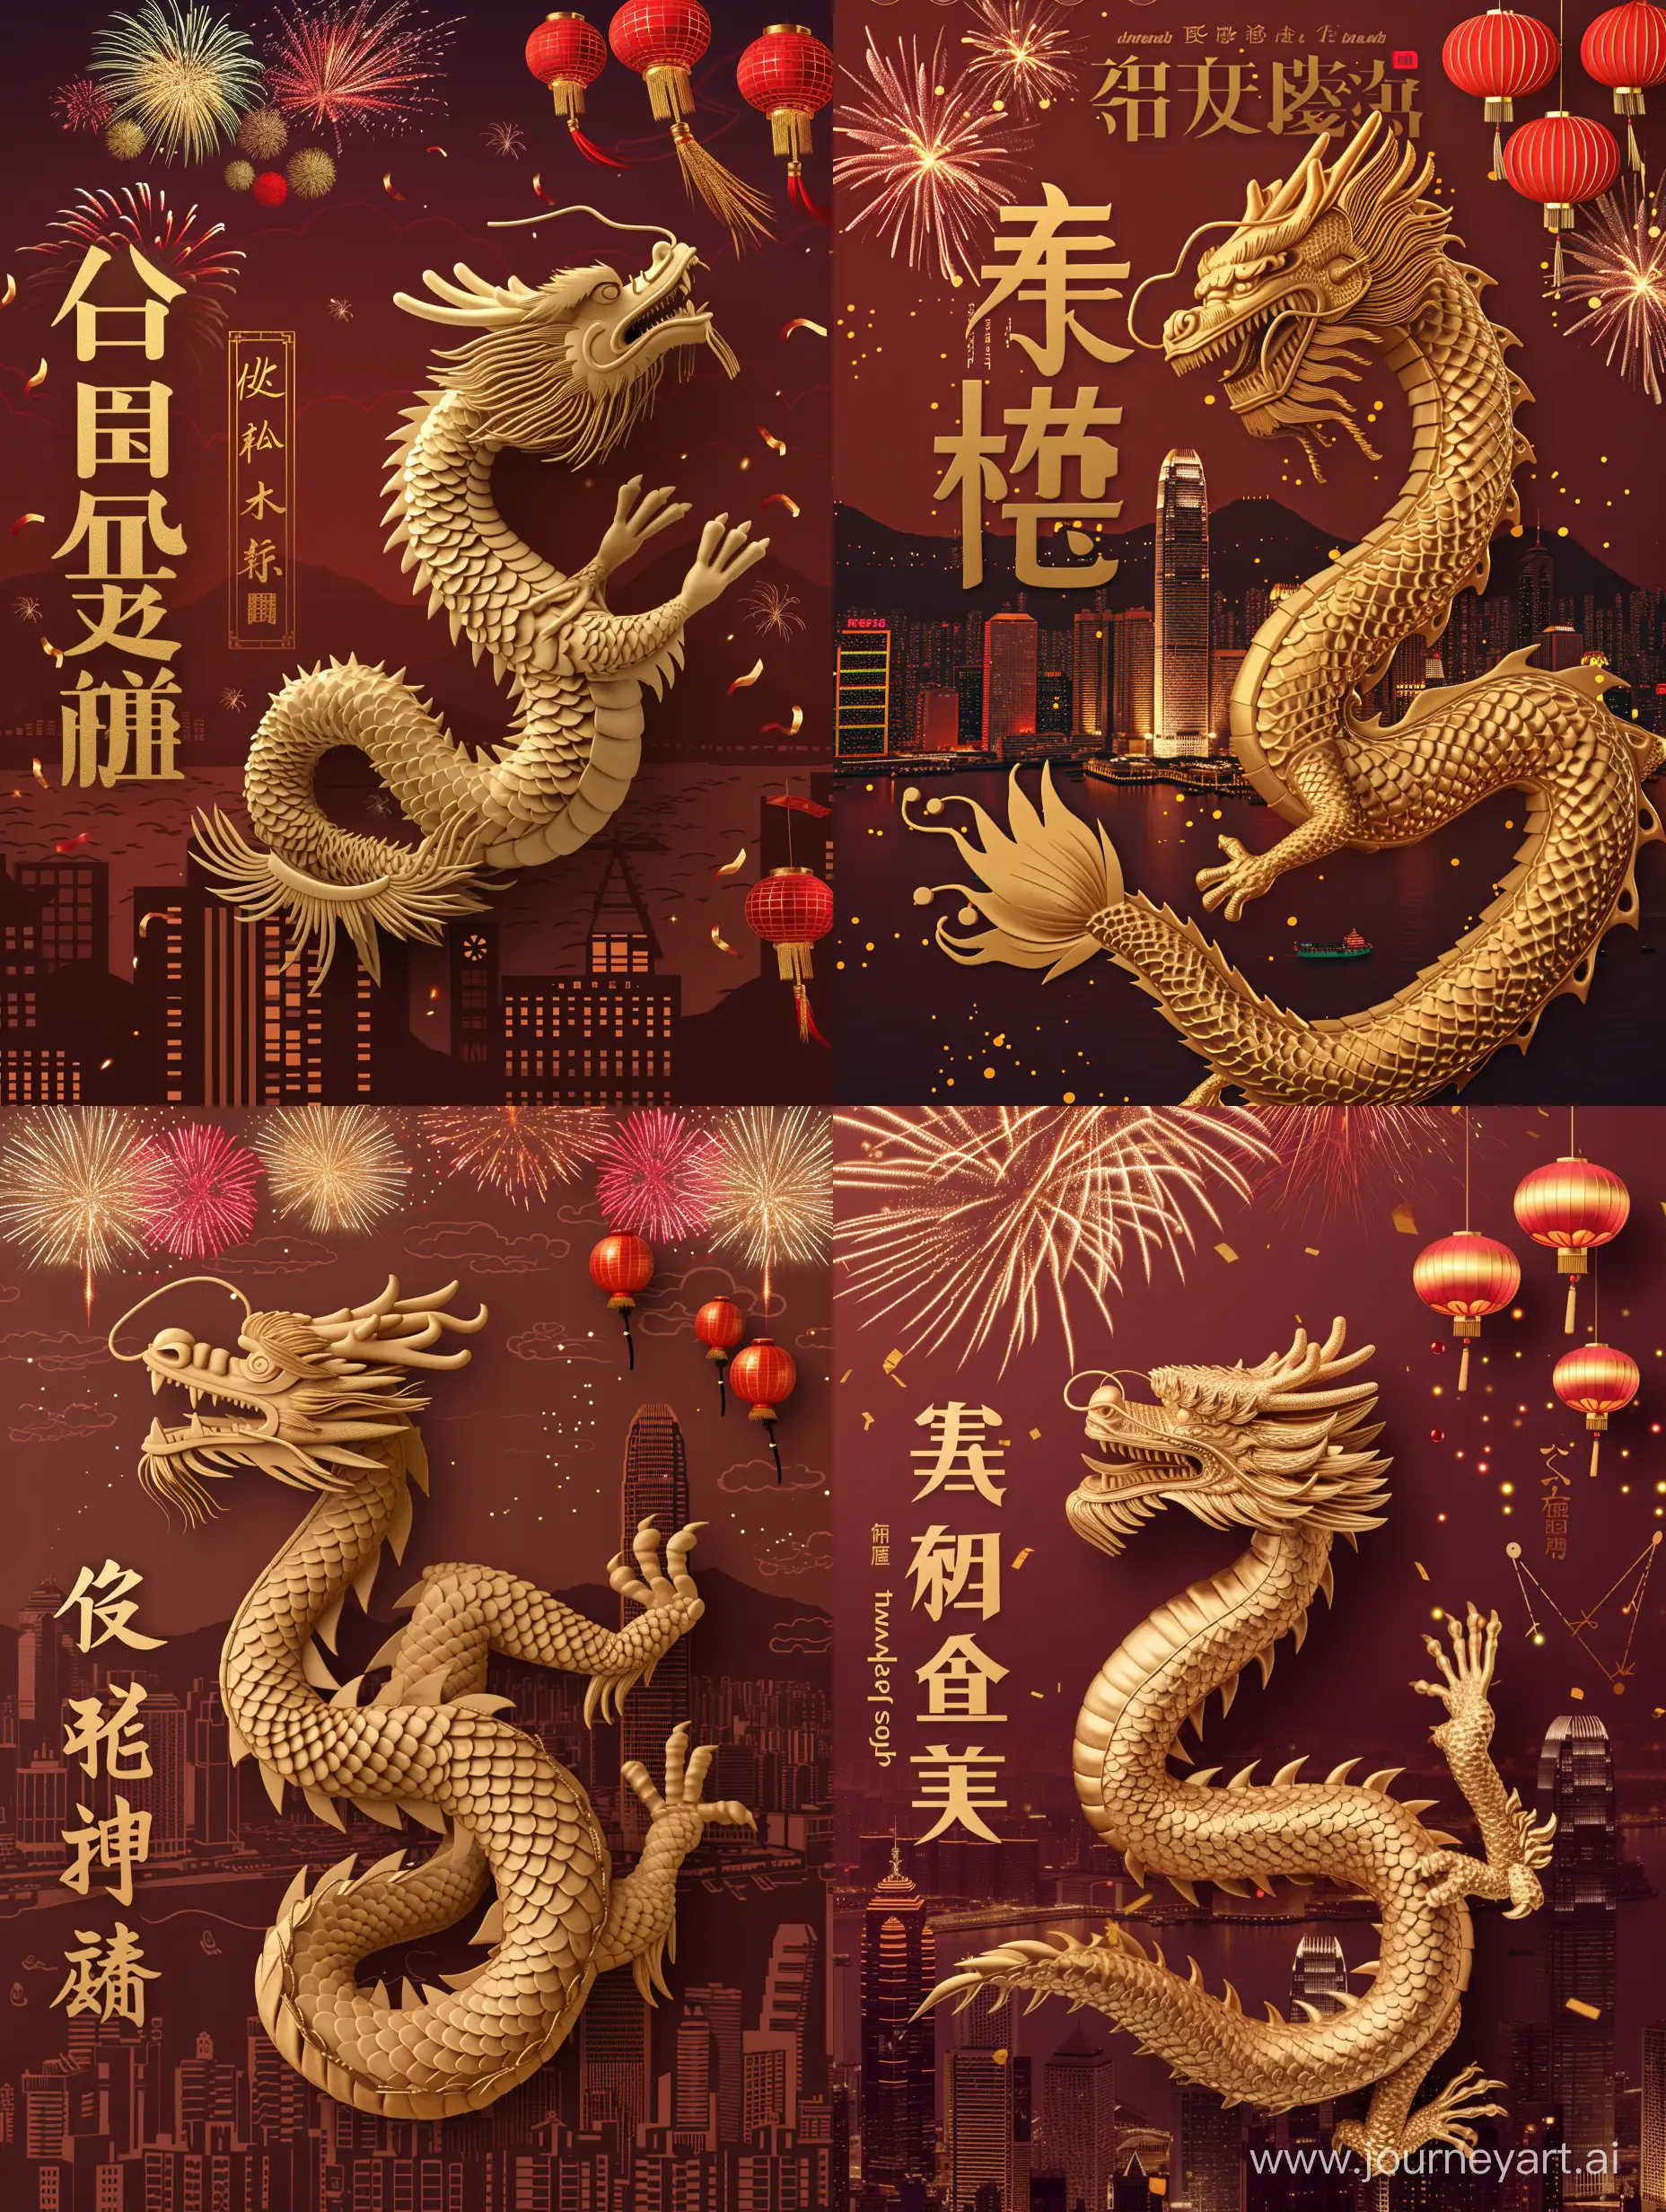 a Chinese styled golden dragon, with 2 claws, side view, 3D style with details lighting, located across the screen, head on left top and tail on right button; background is Hong Kong city view silhouette in dark red color across the lower half of screen; colourful fireworks on top, 3D style; 3 Chinese styled lanterns in red and gold located top right corner; text “龍年吉祥” with shadows, bold, calligraphy style, golden color, top down located on the left next to dragon head.